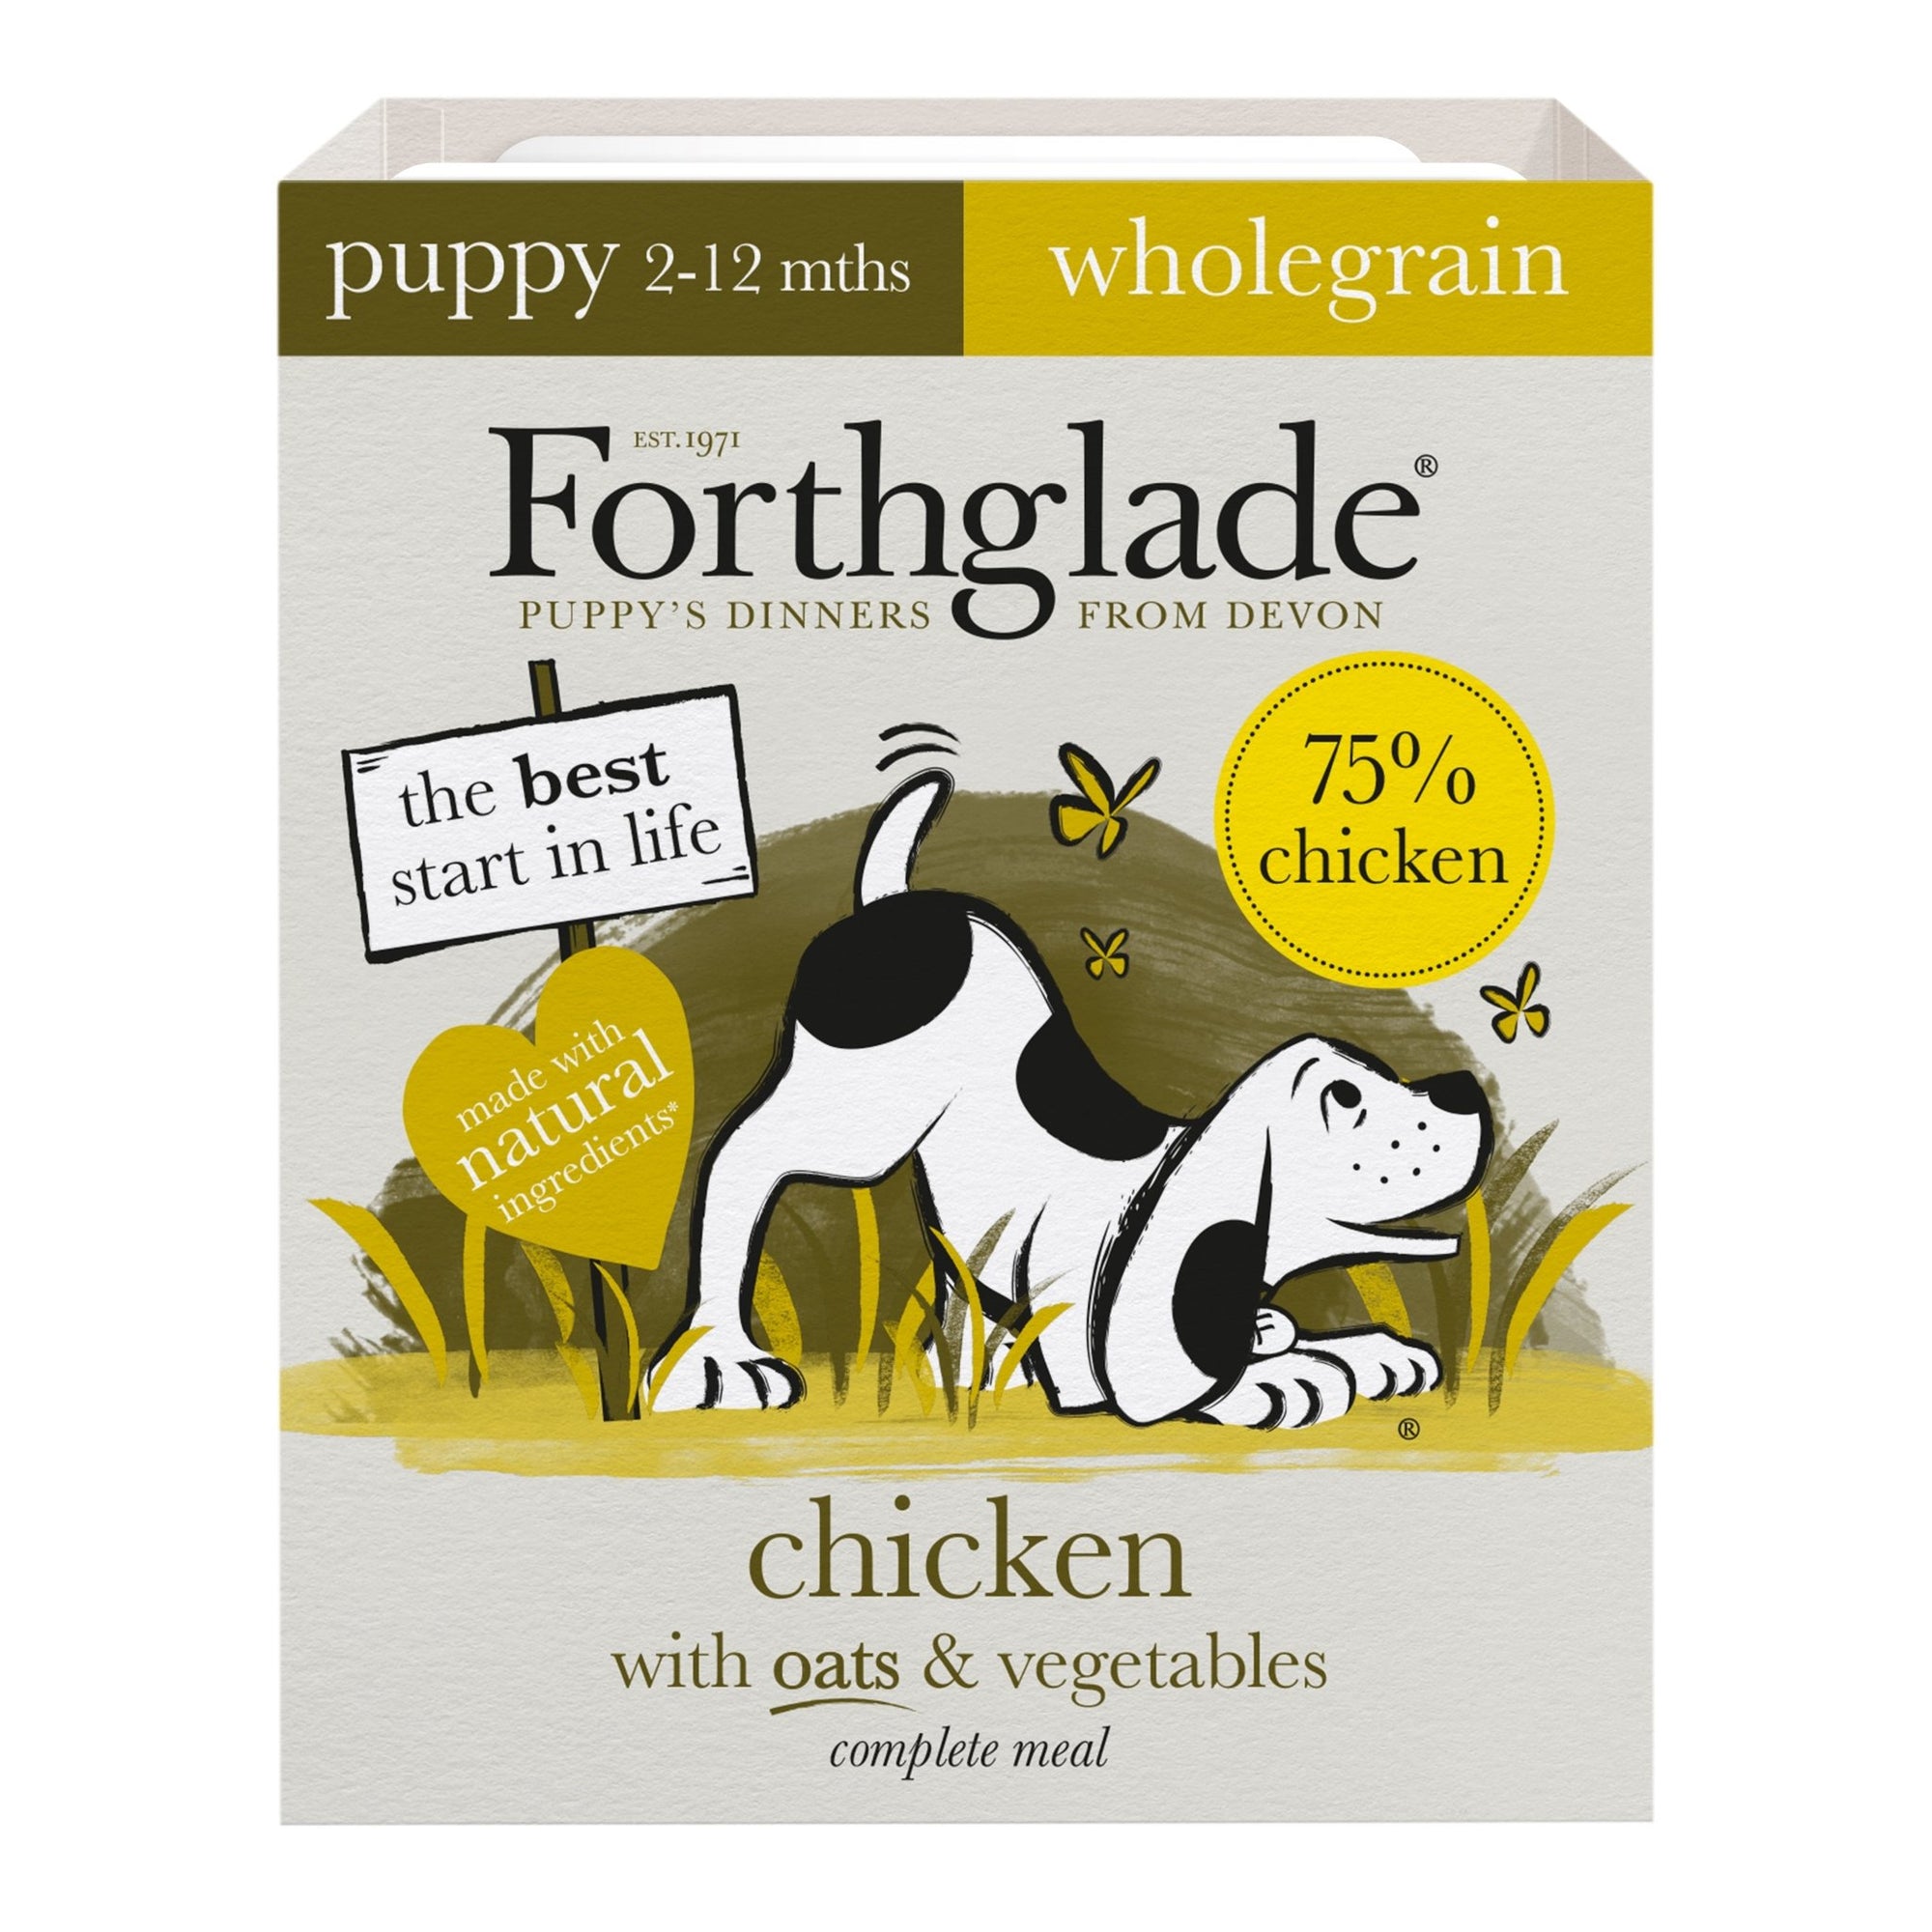 Forthglade Puppy Complete Wholegrain Chicken with Oats & Veg 18x395g, Forthglade,